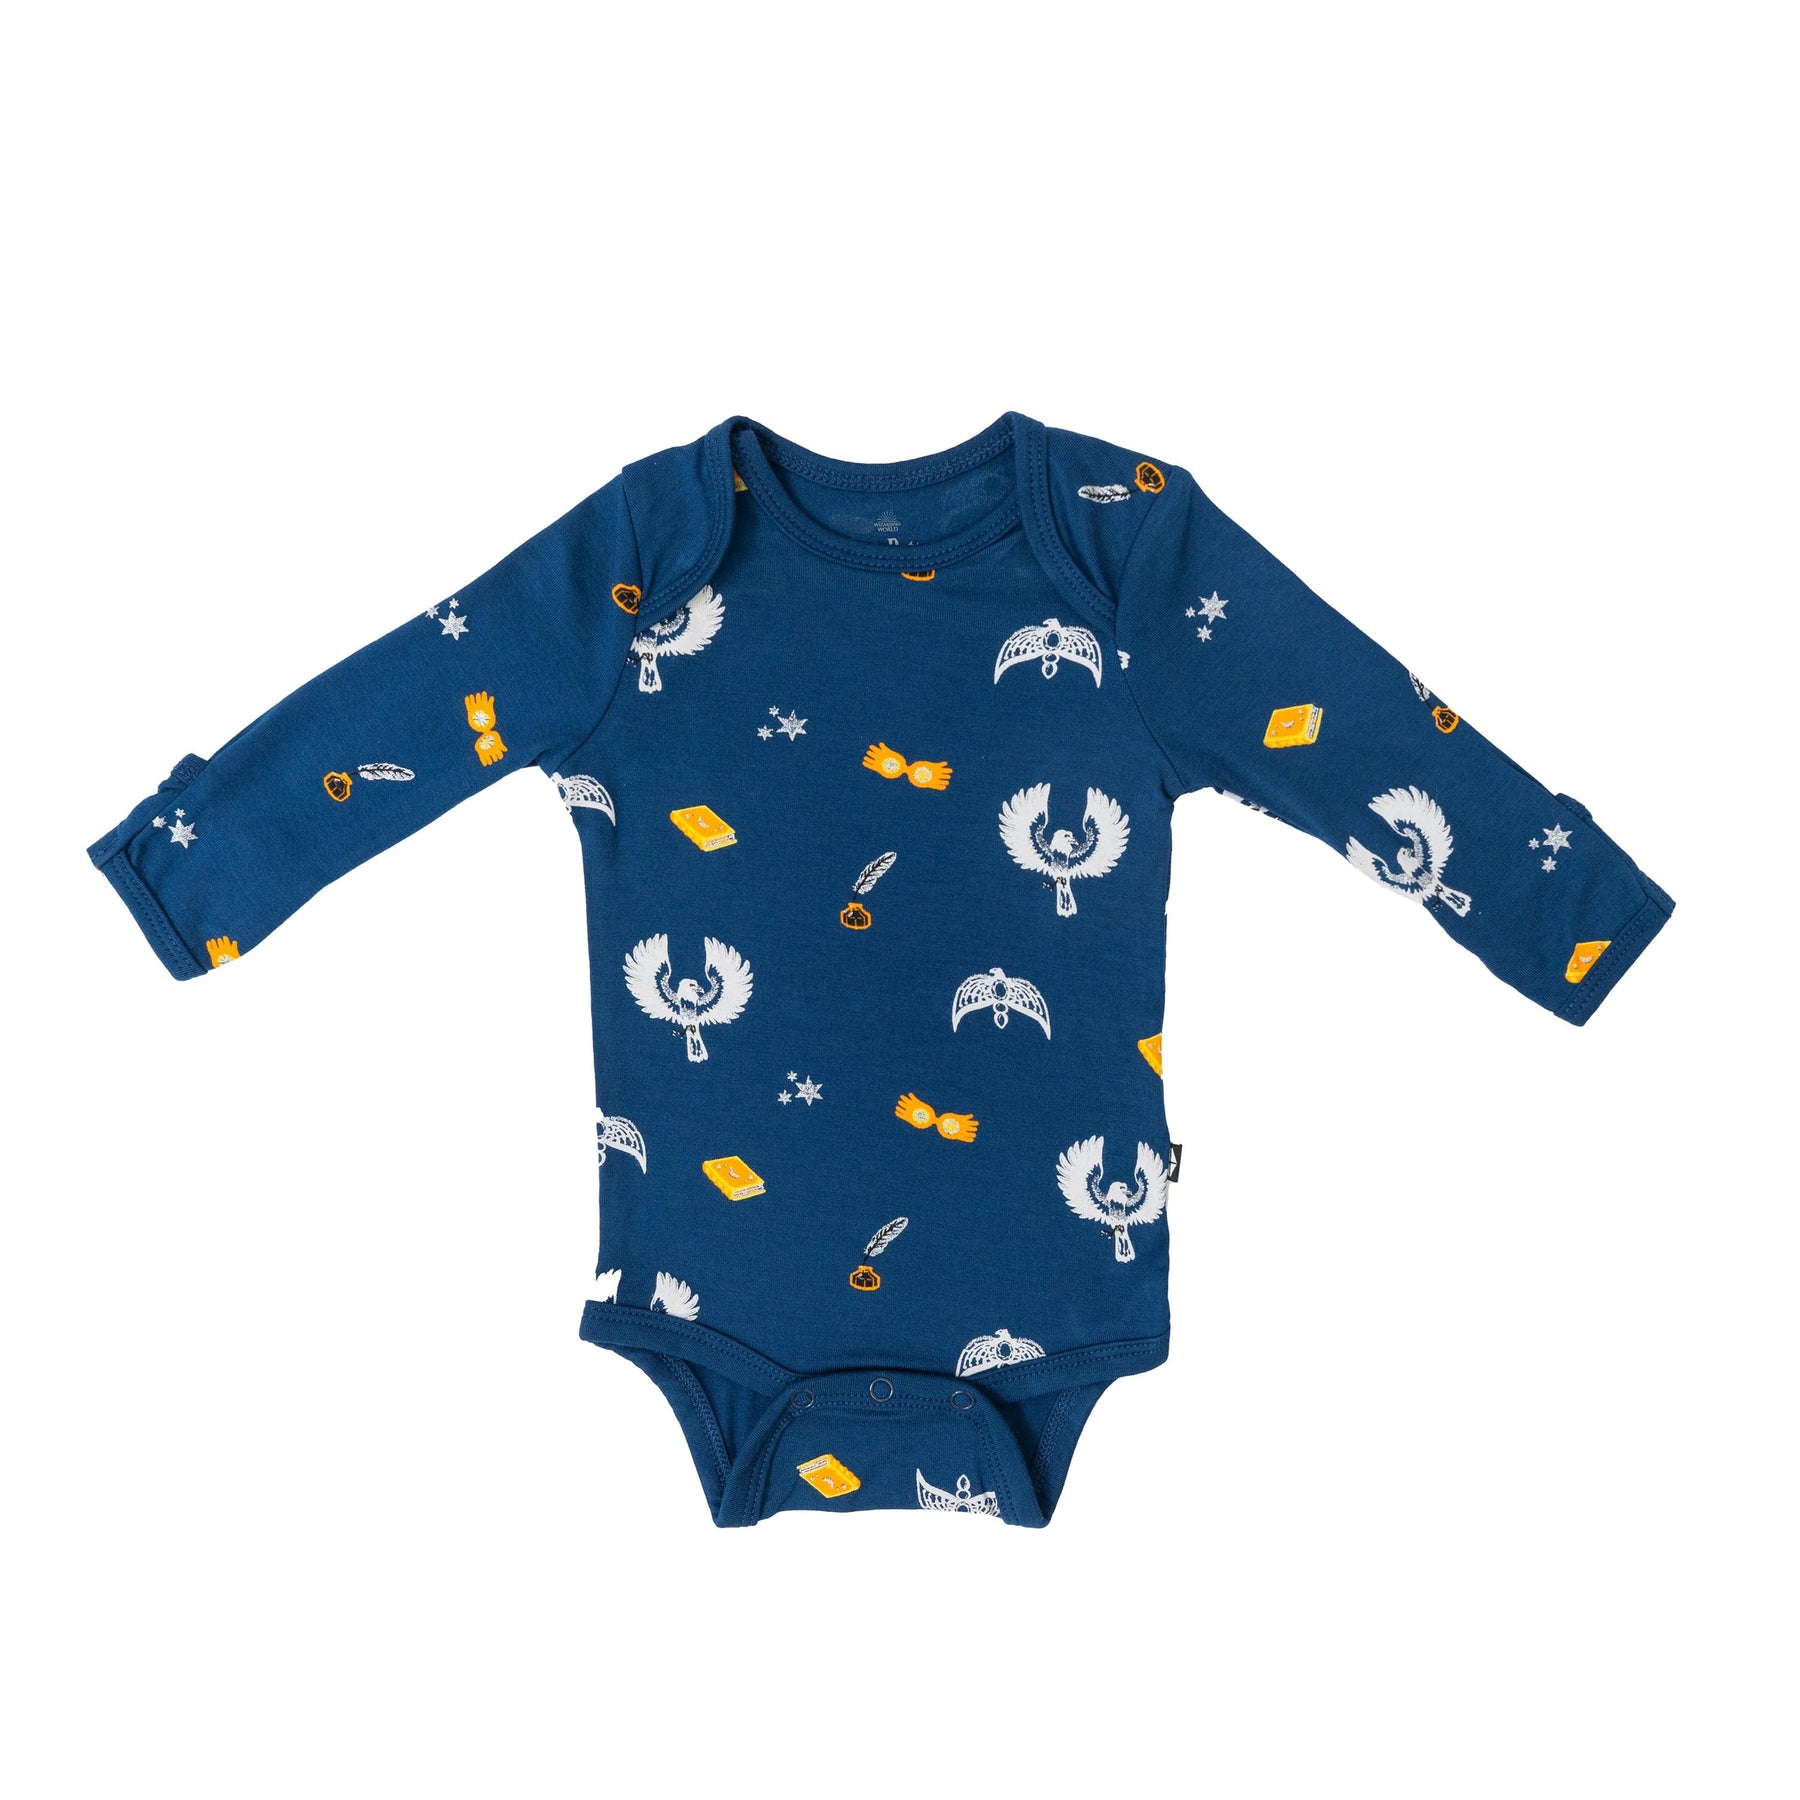 Harry Potter Baby Boys Clothing 3-Piece Set with Bodysuit, Hat, and Socks  Gifts Baby Clothes